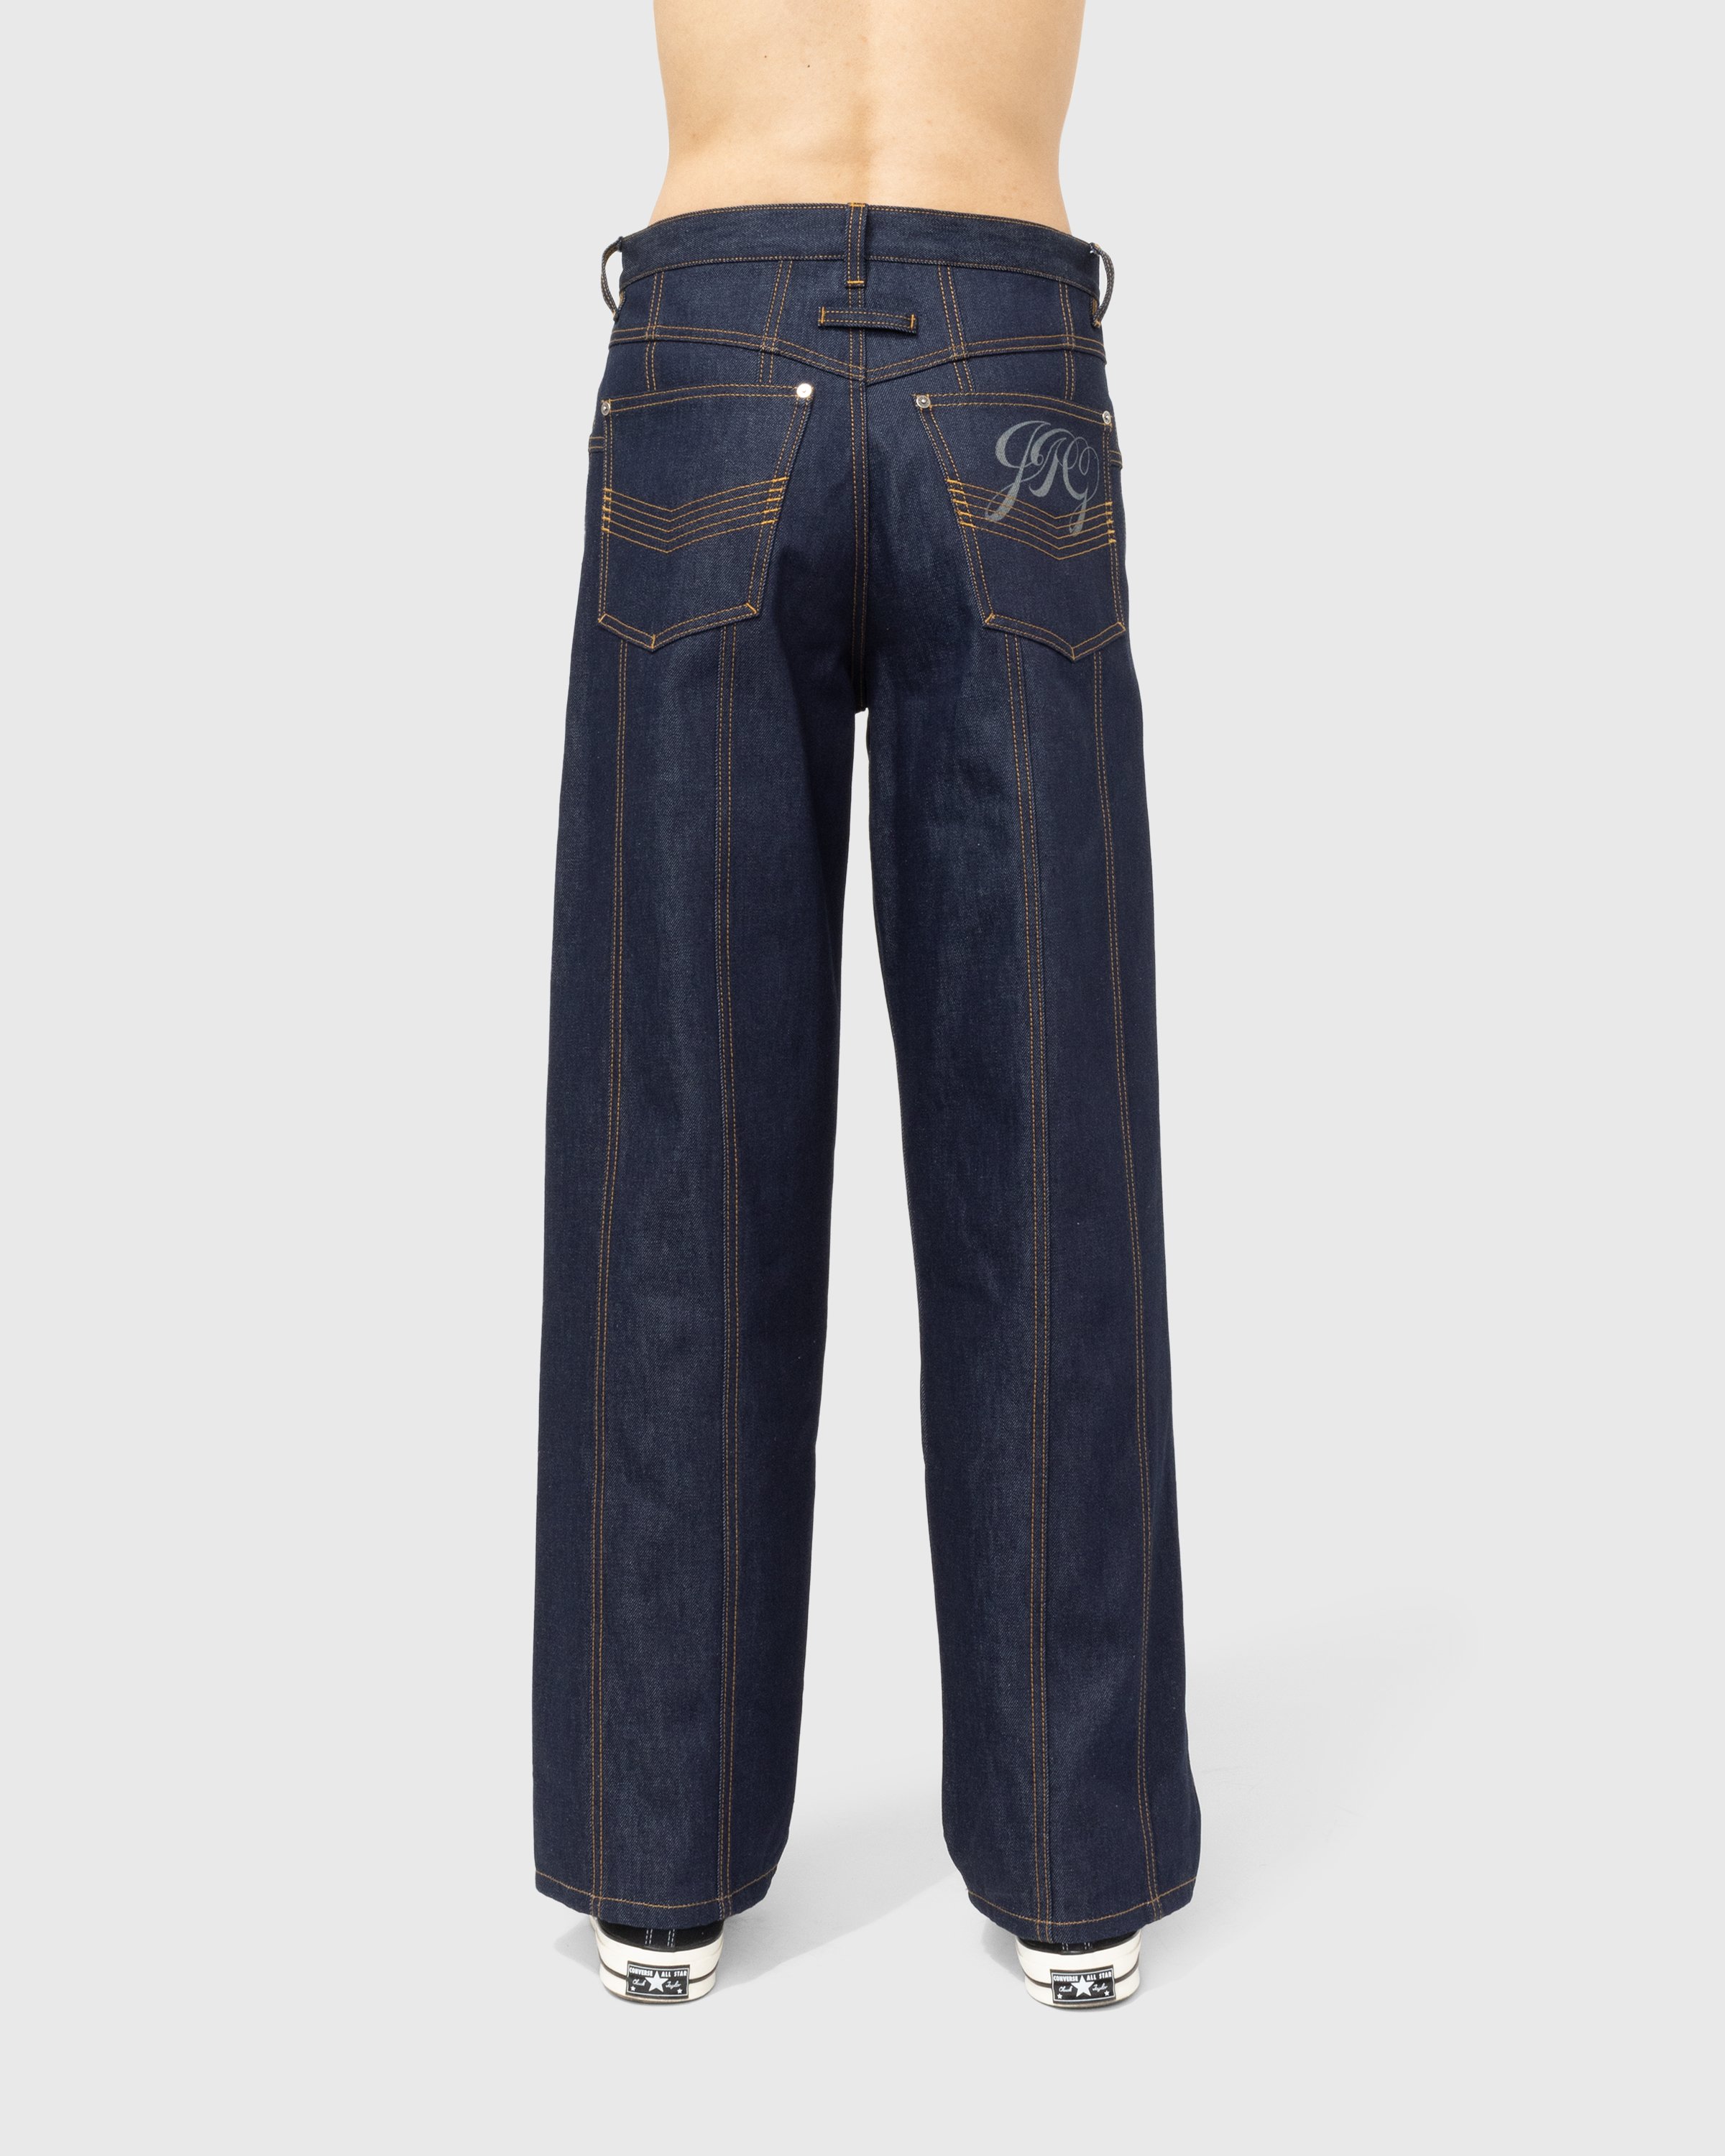 Jean Paul Gaultier - Raw Low-Rise Jeans Indigo - Clothing - Blue - Image 4